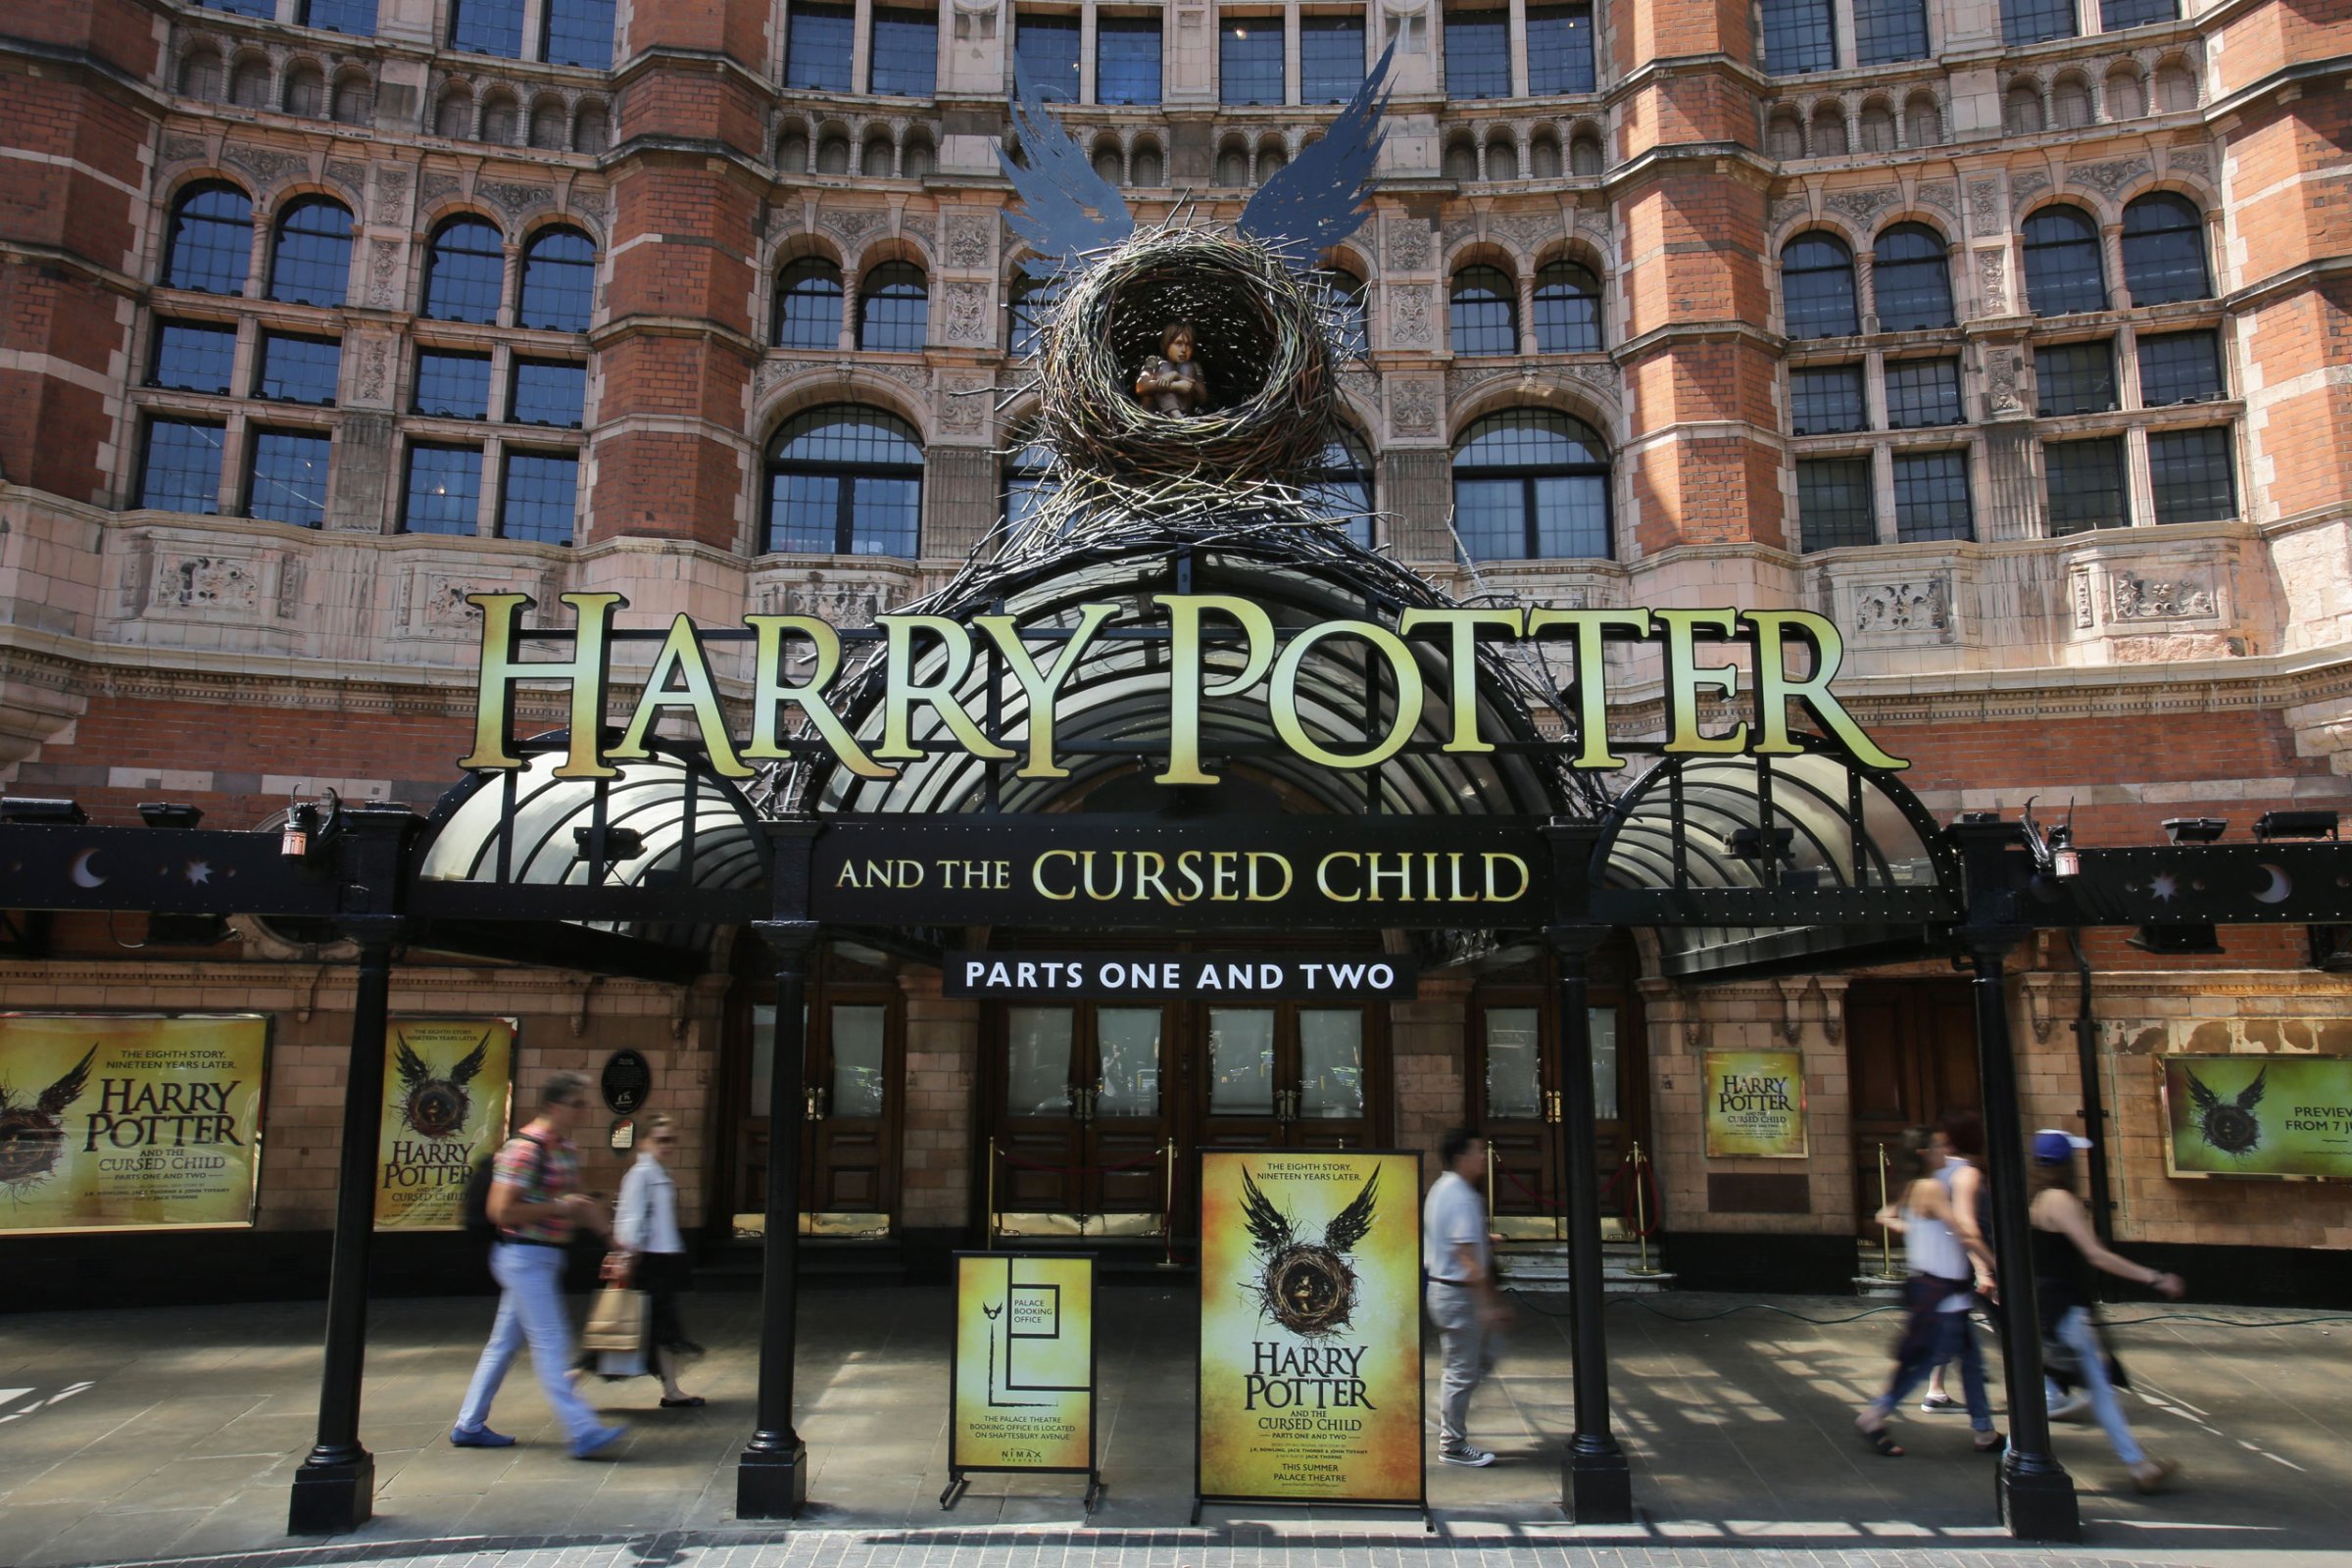 The front of the Palace Theatre promotes its new show 'Harry Potter and the Cursed Child' in London on June 6, 2016.